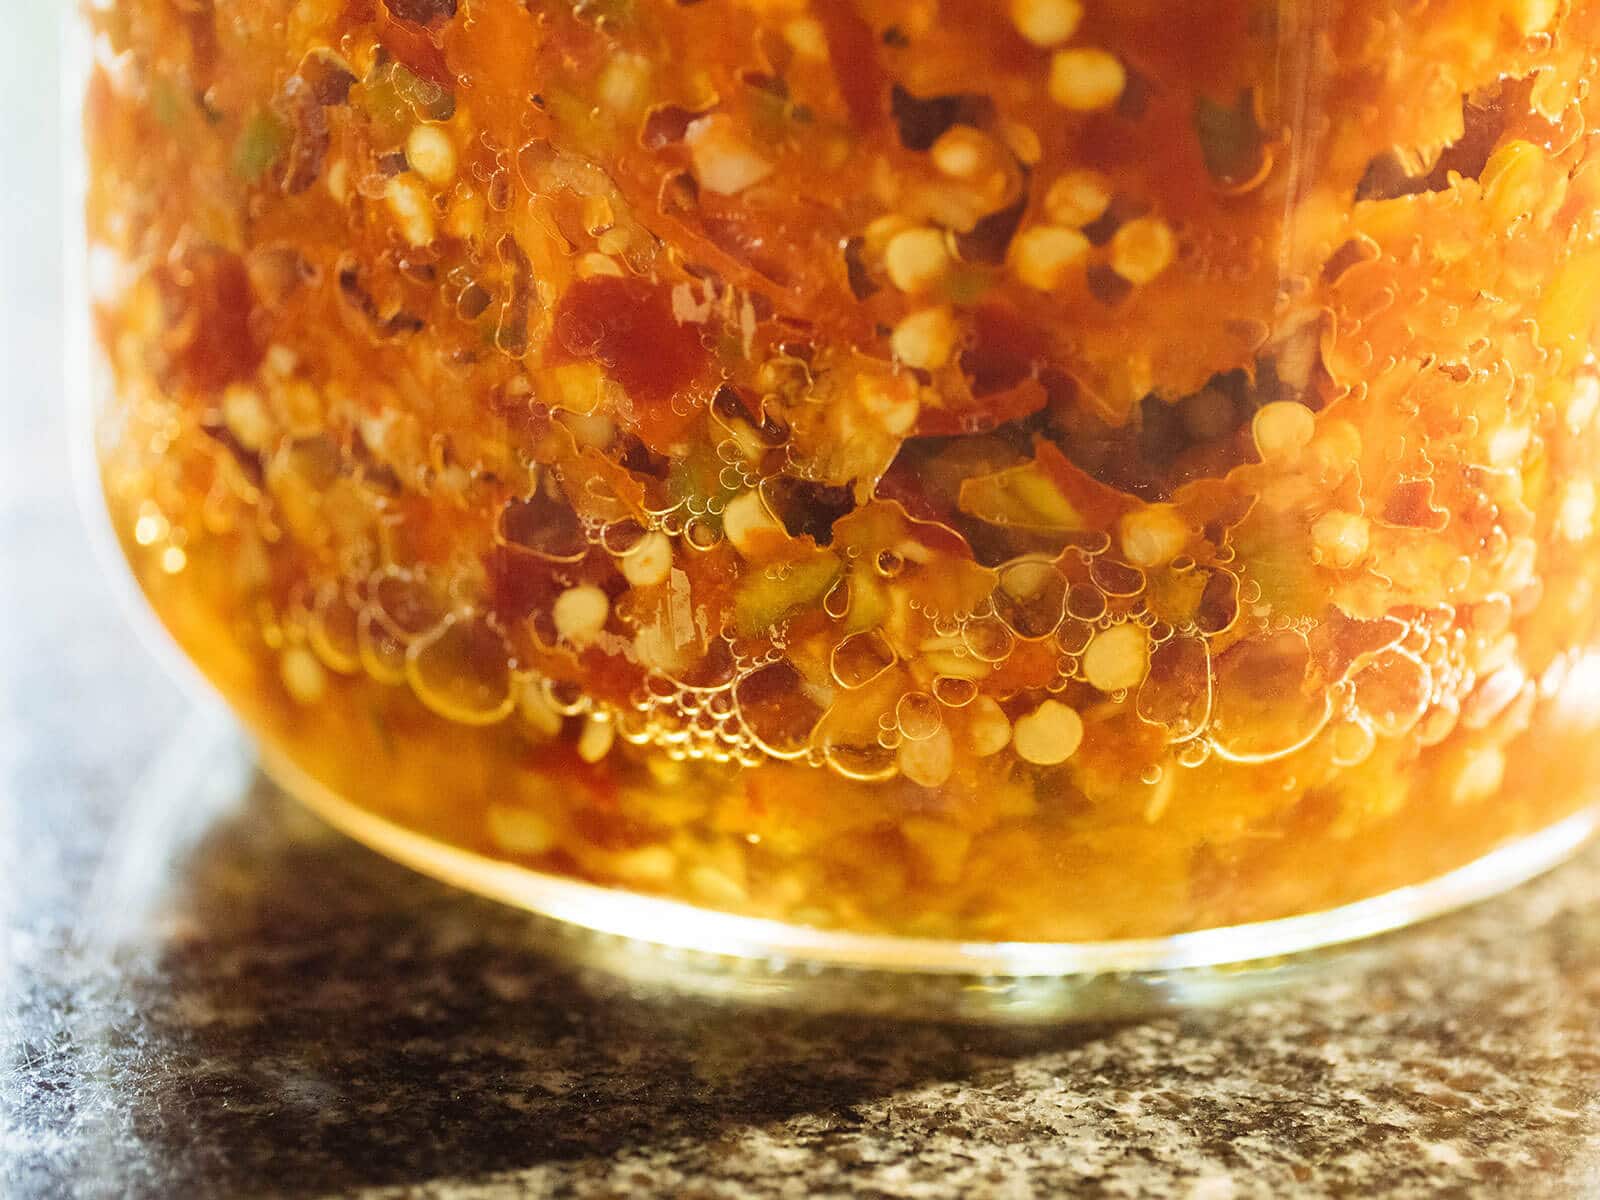 Close-up of lactic acid bacteria bubbles in an actively fermenting jar of chile peppers